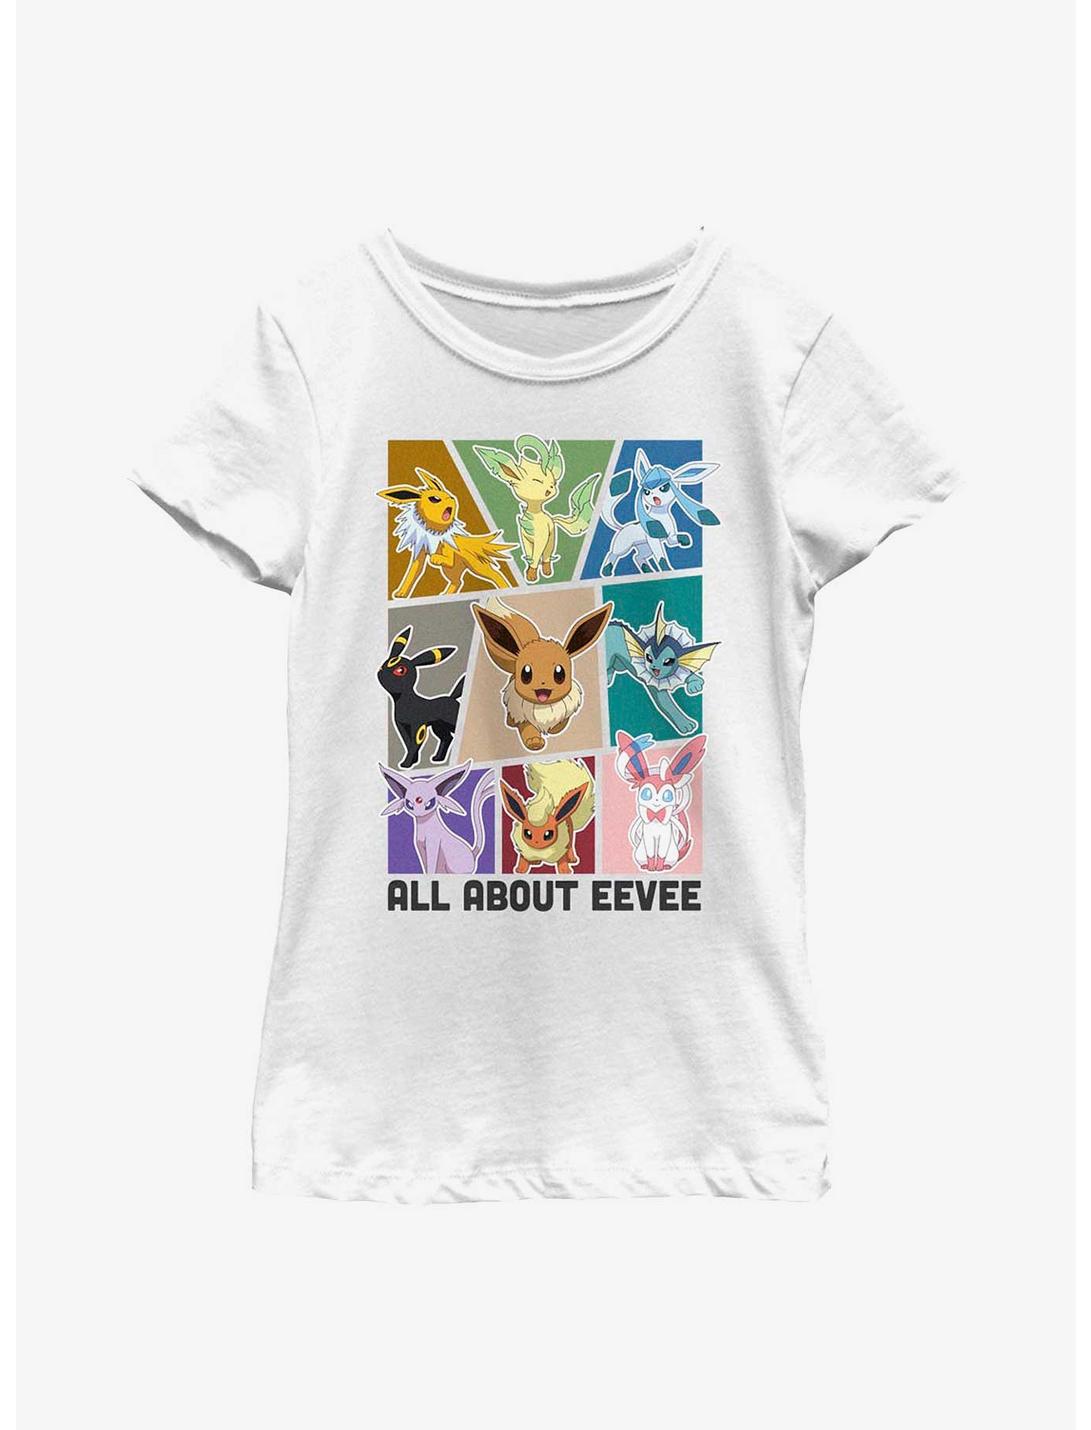 Pokemon Eeveelution All About Eevee Youth Girls T-Shirt, WHITE, hi-res